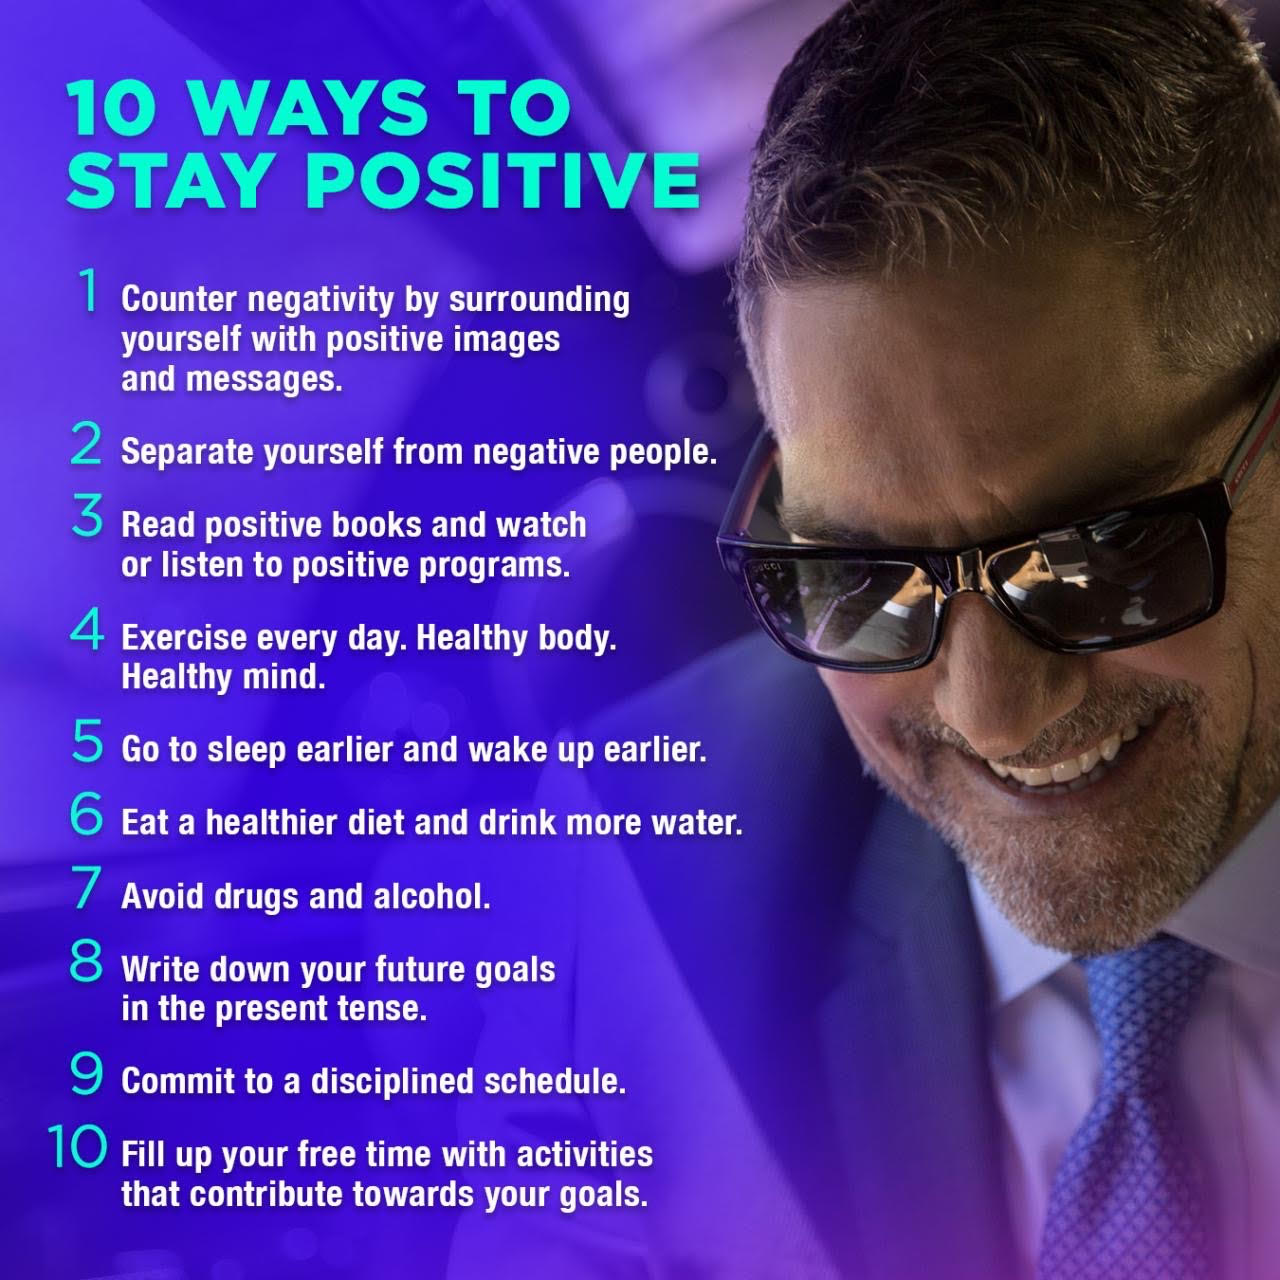 Tips to Stay Positive